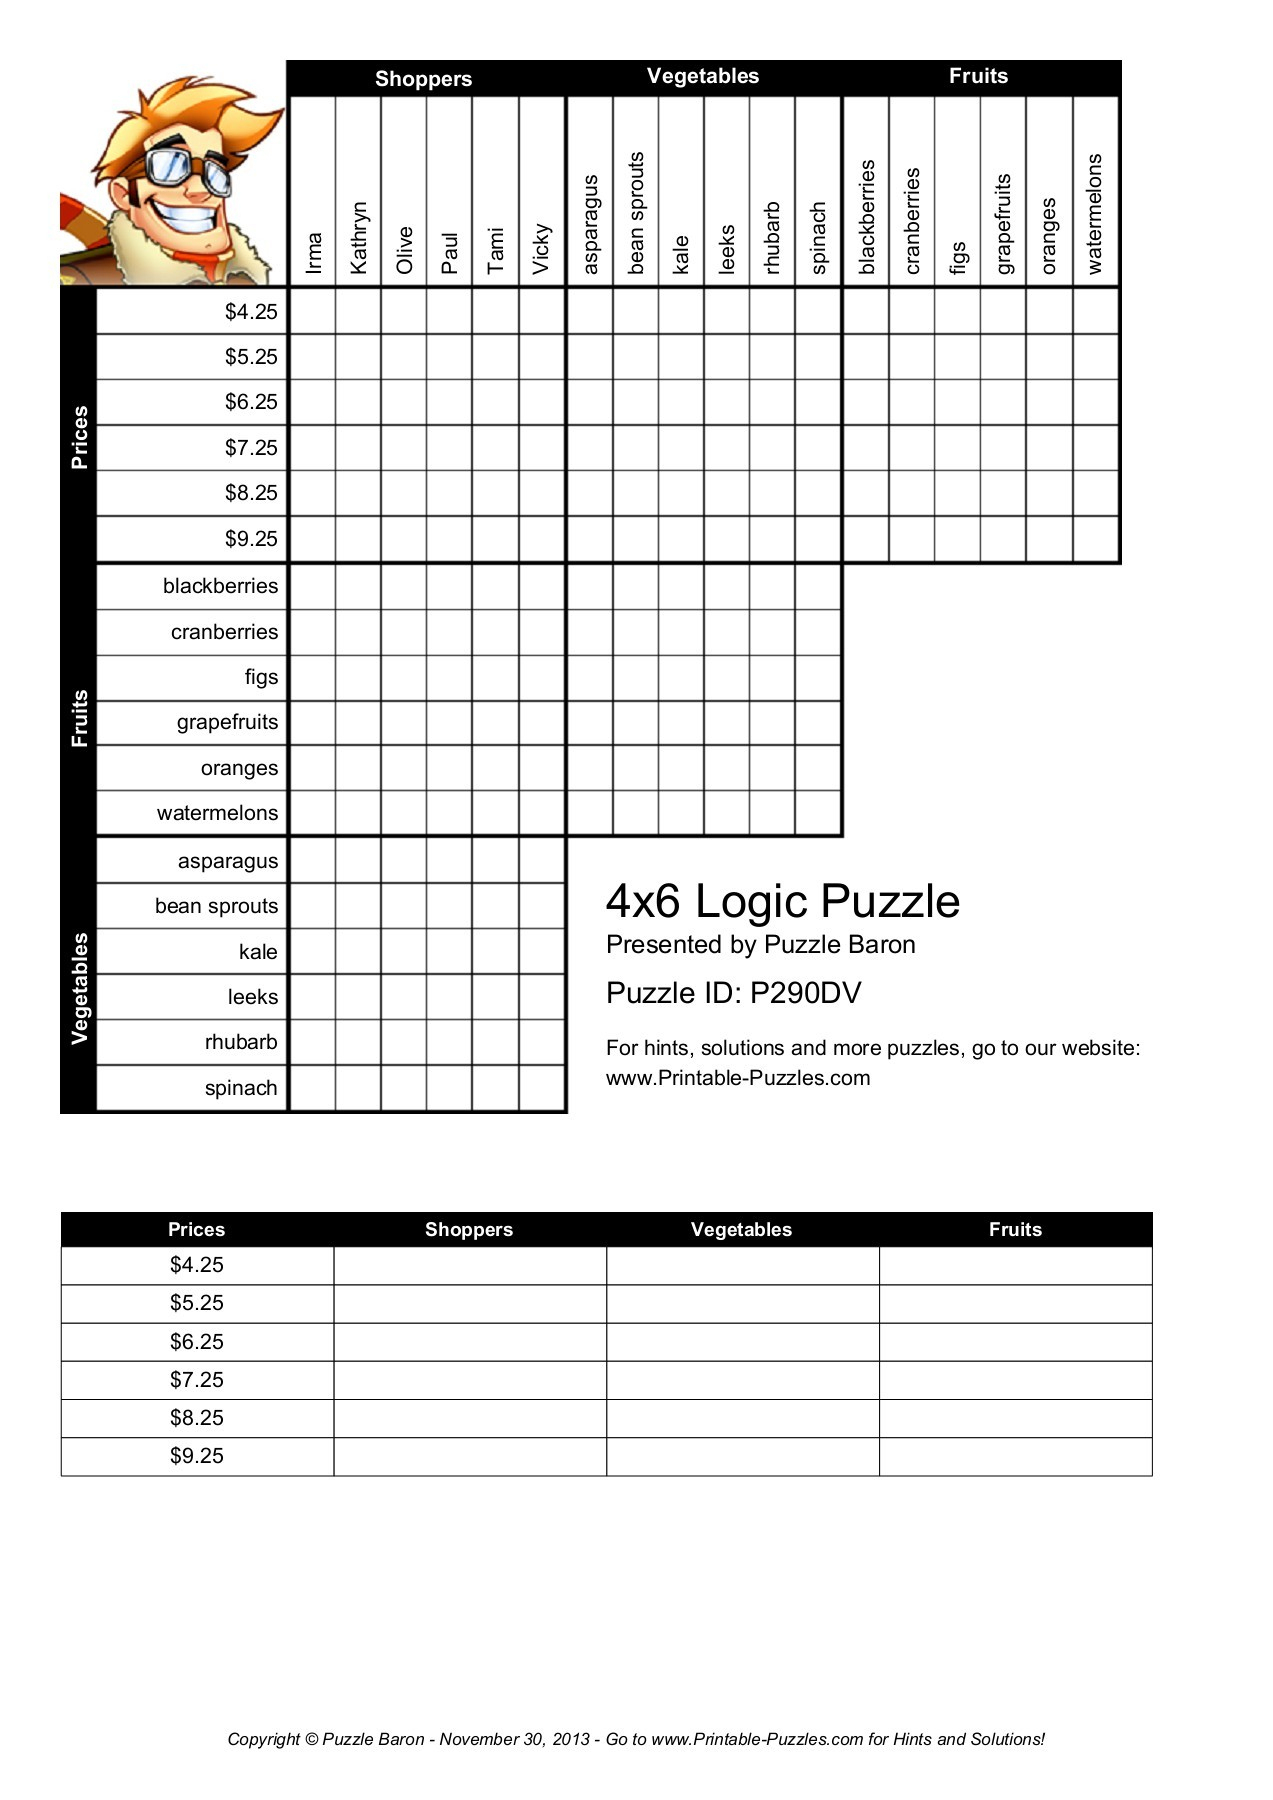 4X6 Logic Puzzle - Logic Puzzles - Play Online Or Print - Printable Puzzle Baron